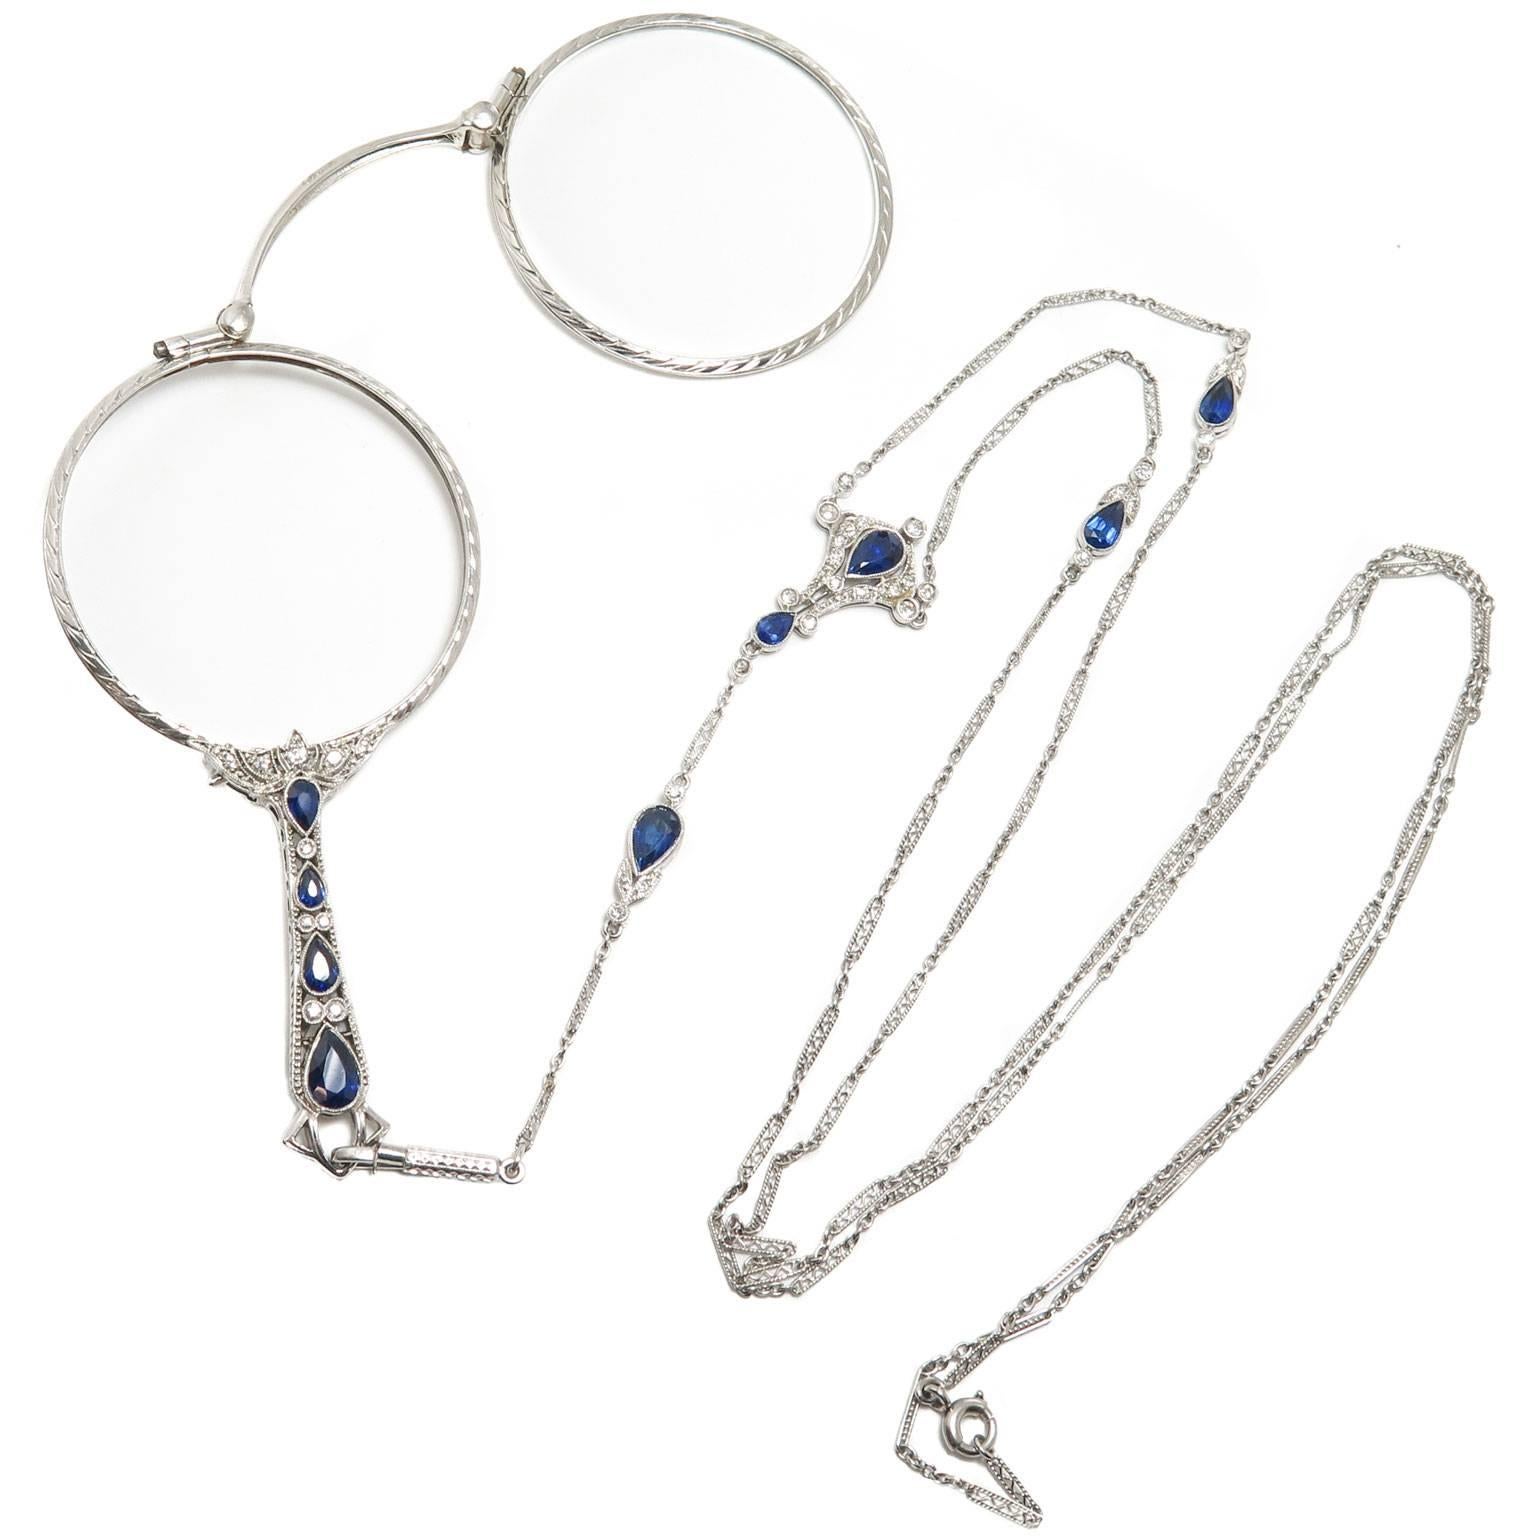 Circa 1920s Cartier Lorgnette with matching chain, the lorgnette measures 3 inch in length, is set with Diamonds and Sapphires and is further finished with hand engraved design work. Recently fitted with Clear lenses. The matching chain measures 33